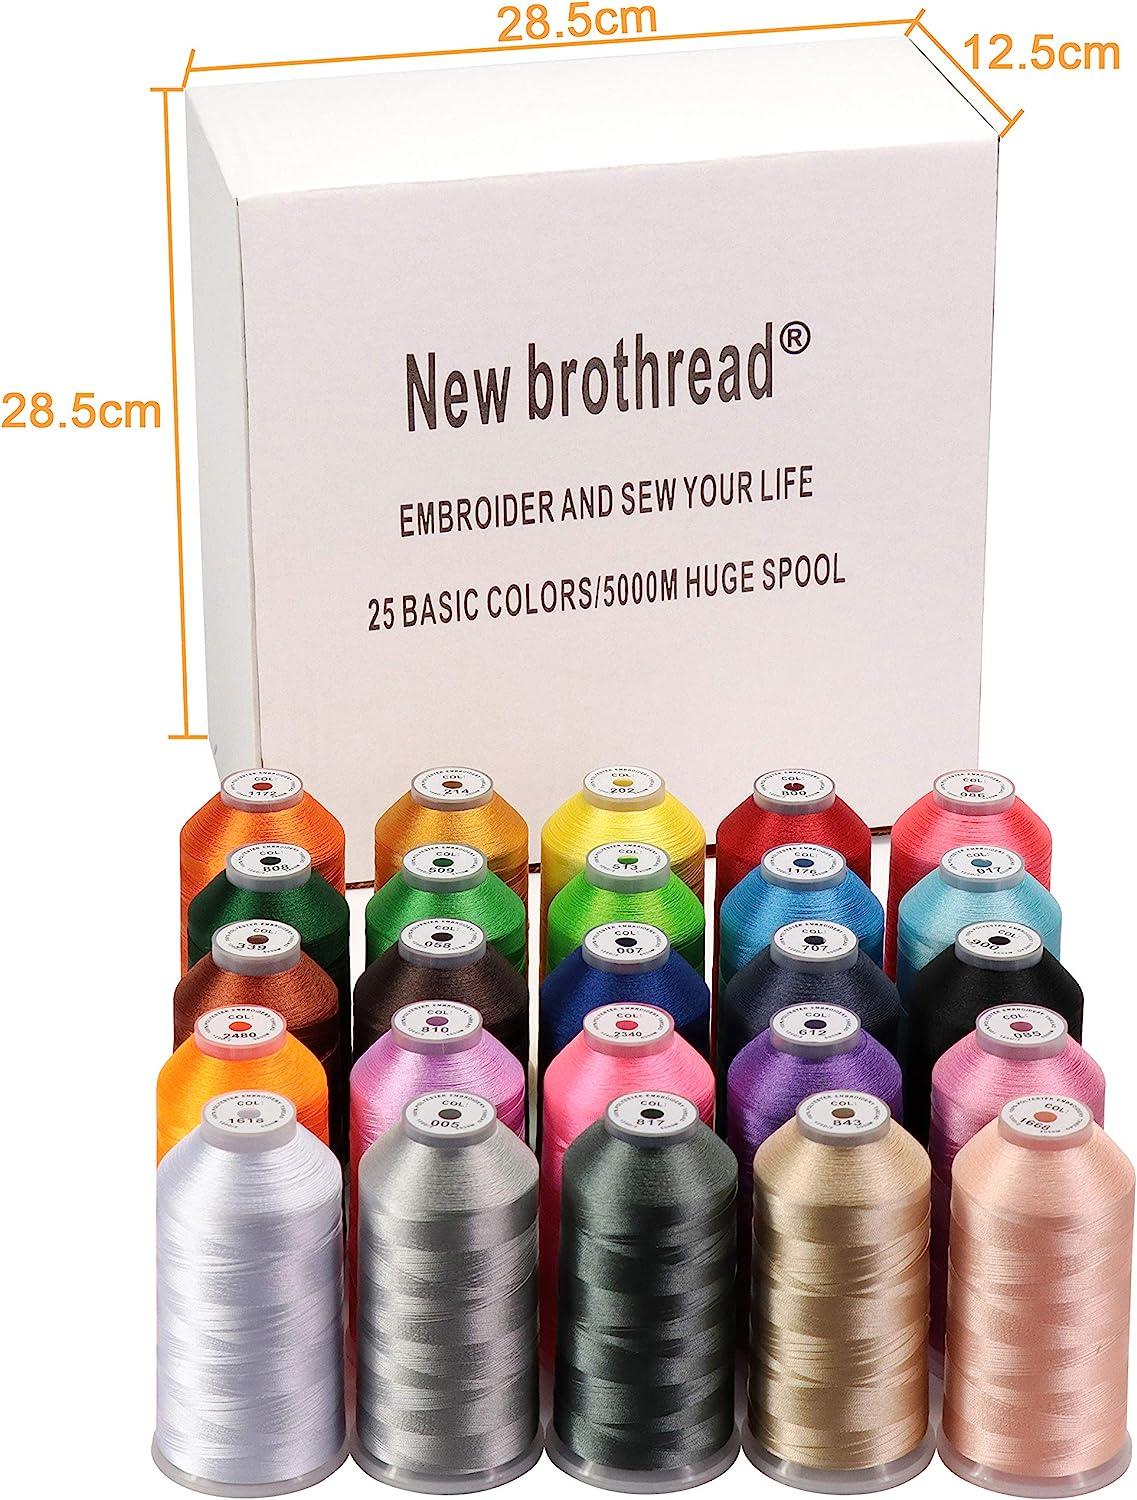 New brothreads - 25 Basic Colors of Huge Spool 5000M Polyester